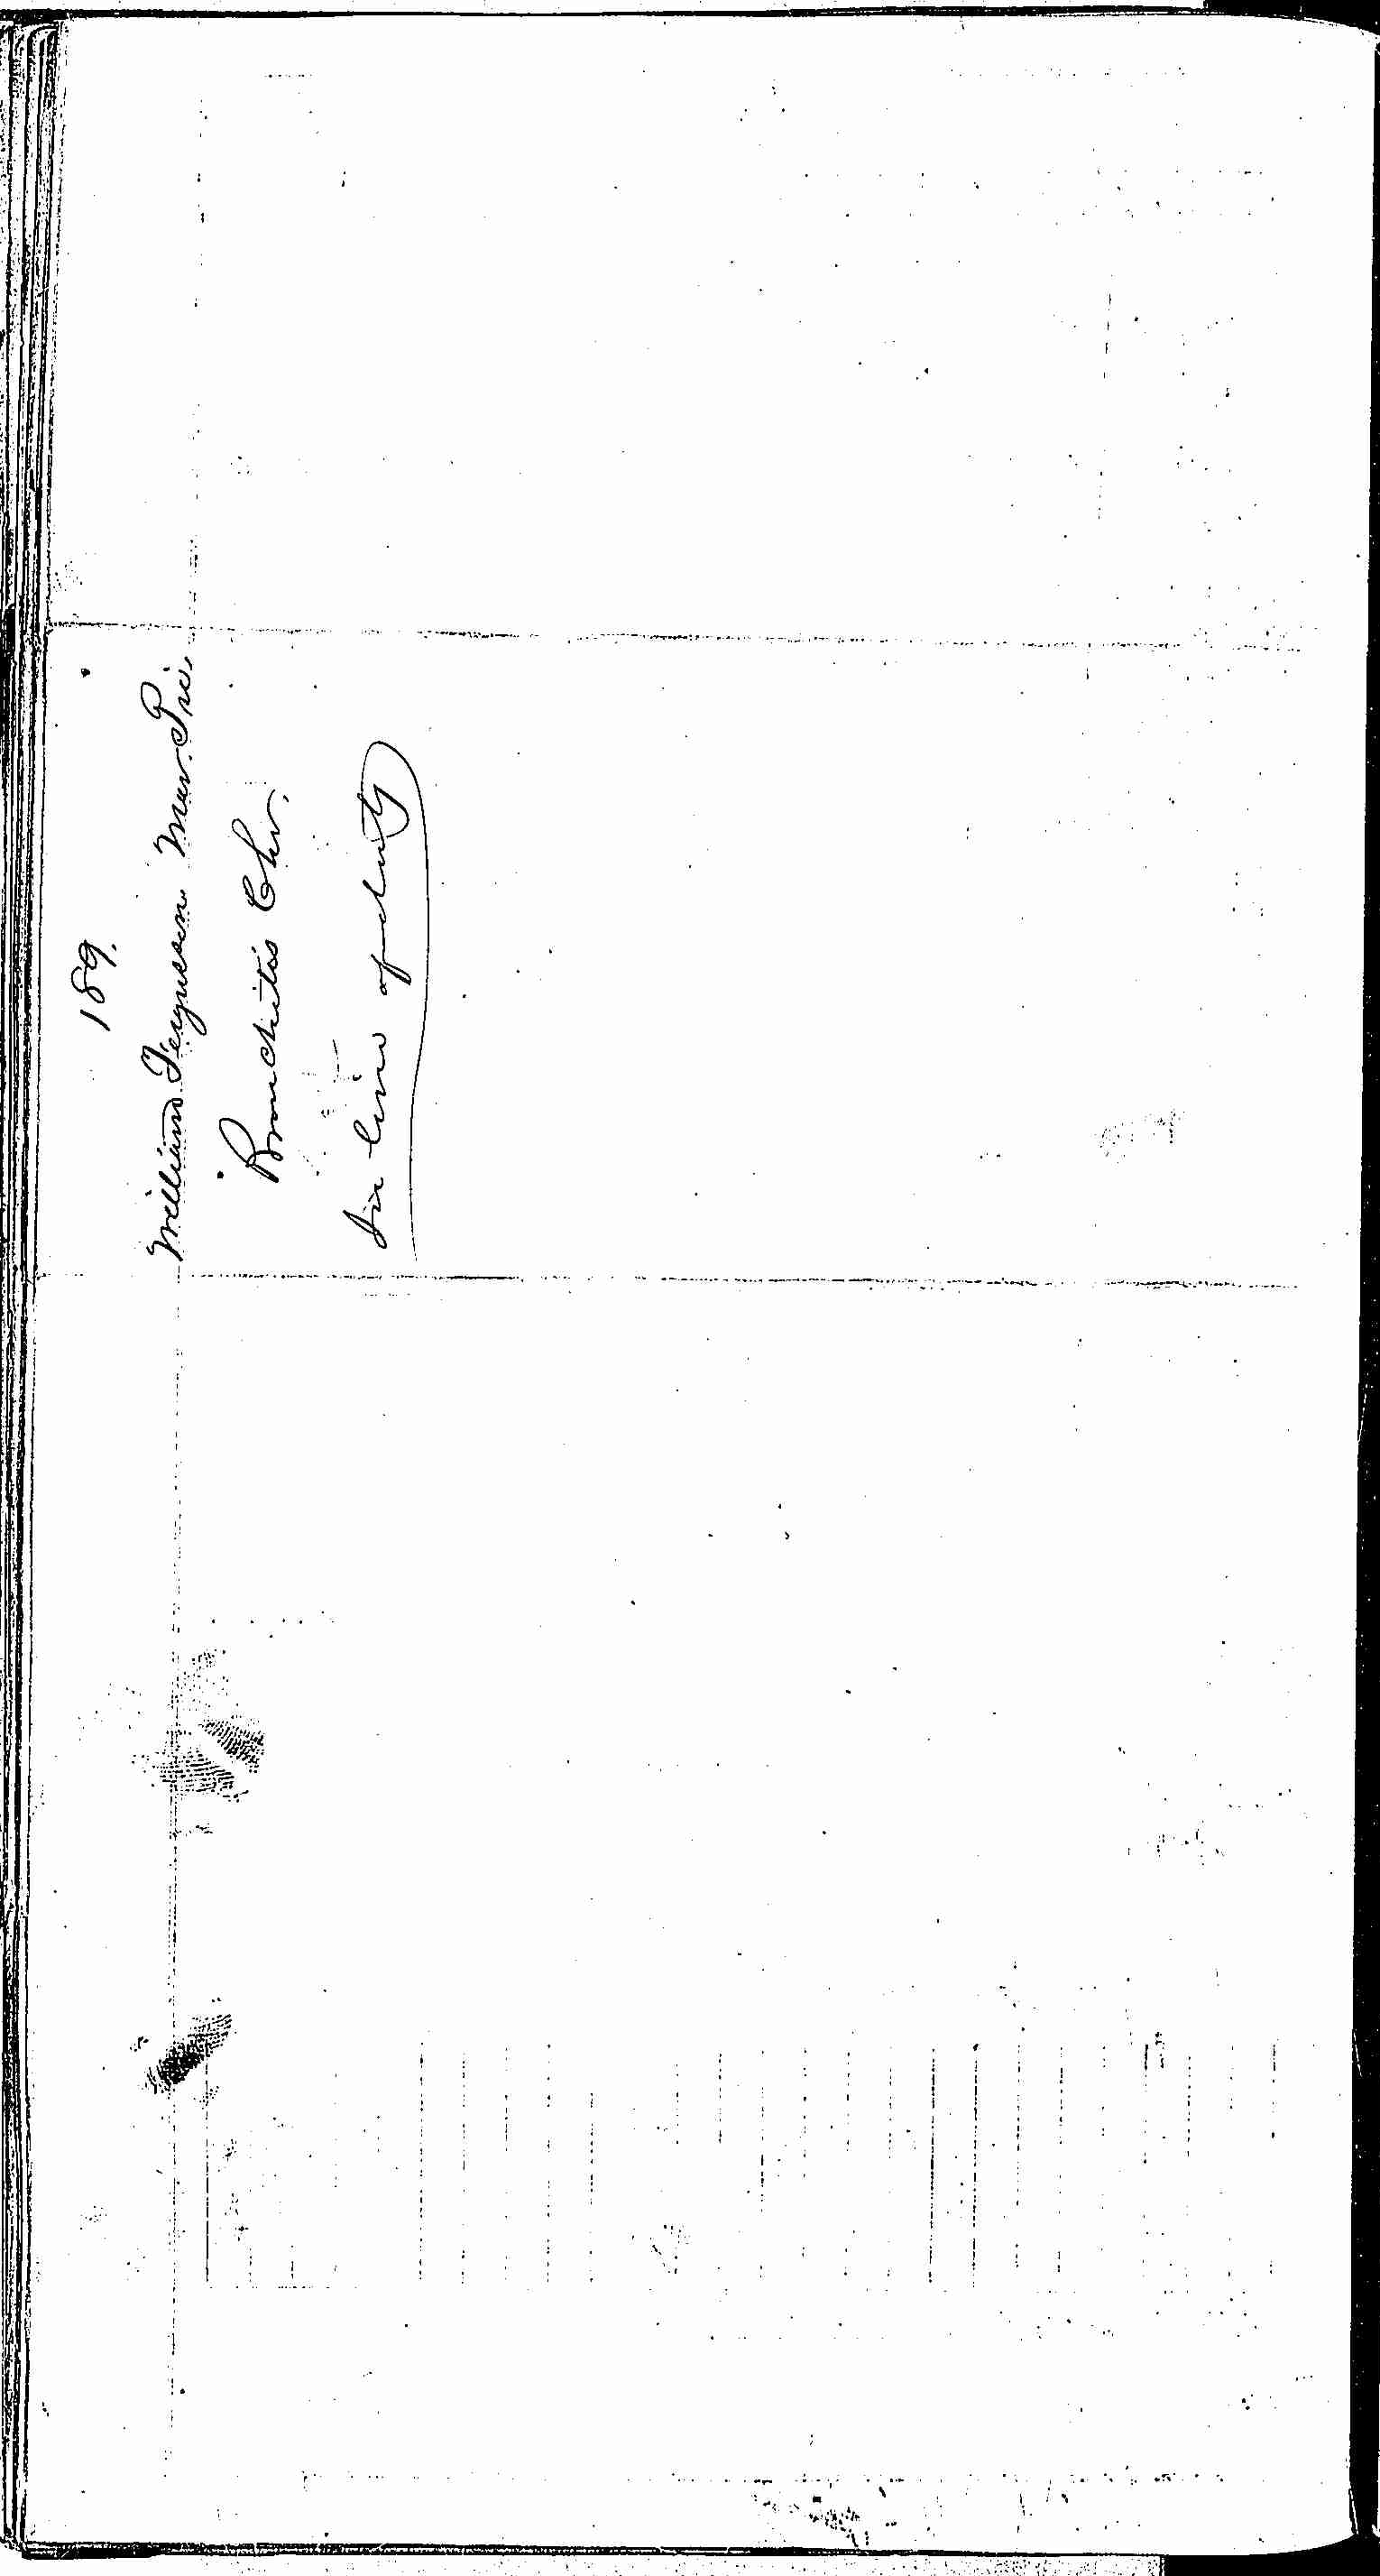 Entry for William Ferguson (page 2 of 2) in the log Hospital Tickets and Case Papers - Naval Hospital - Washington, D.C. - 1866-68